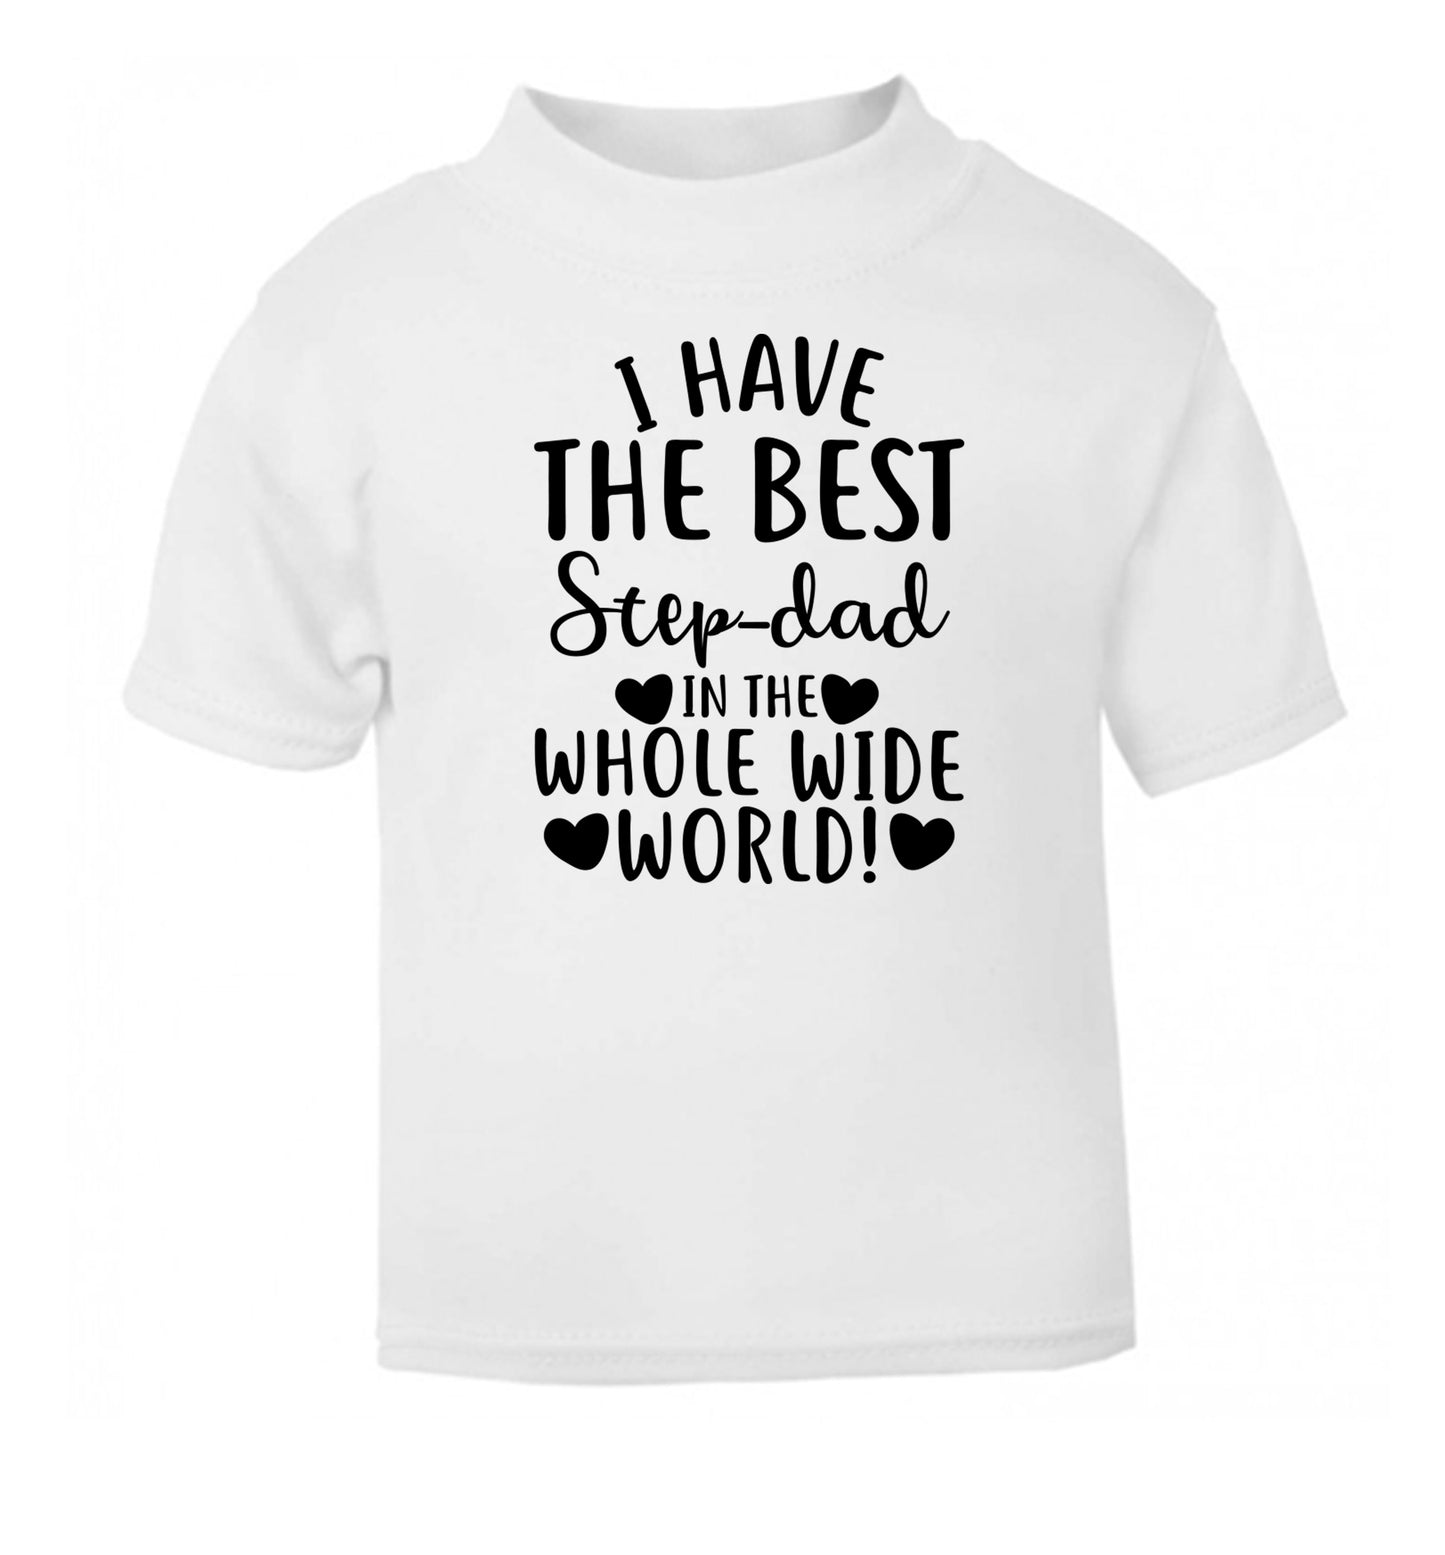 I have the best step-dad in the whole wide world! white Baby Toddler Tshirt 2 Years